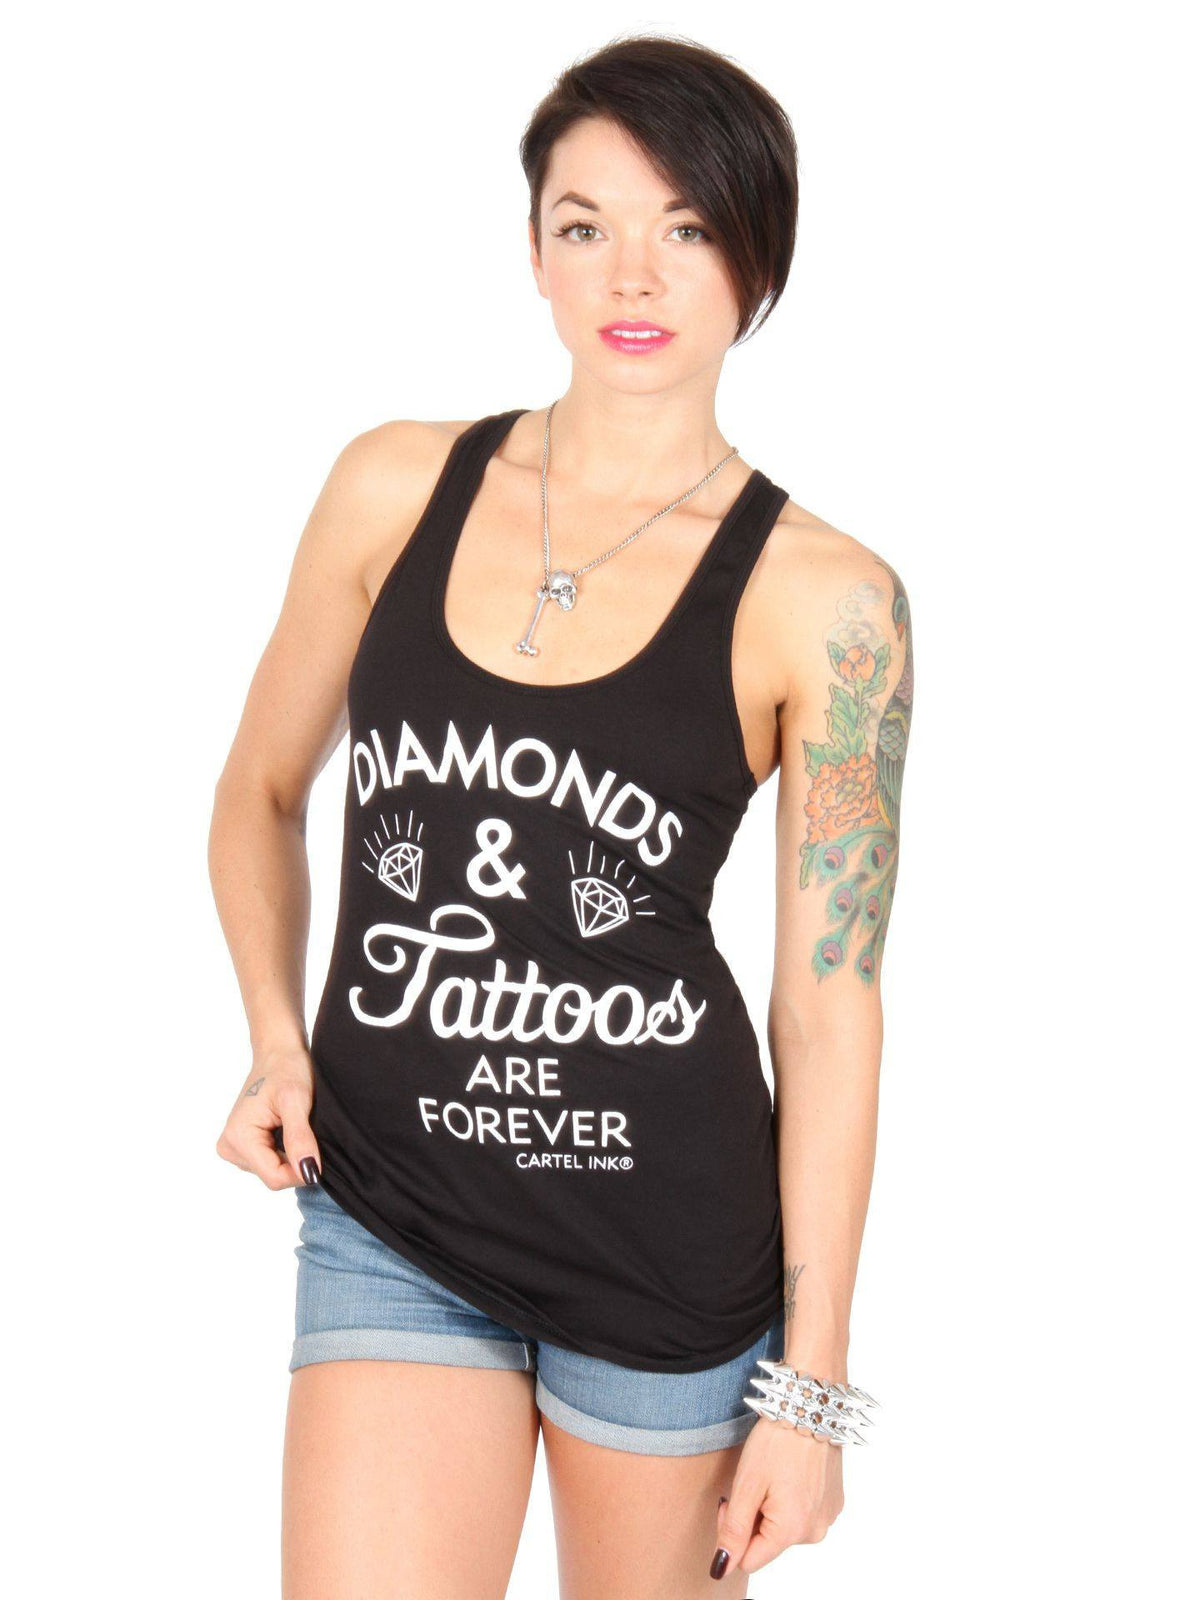 Women&#39;s &quot;Diamonds and Tattoos are Forever&quot; Tank by Cartel Ink - www.inkedshop.com